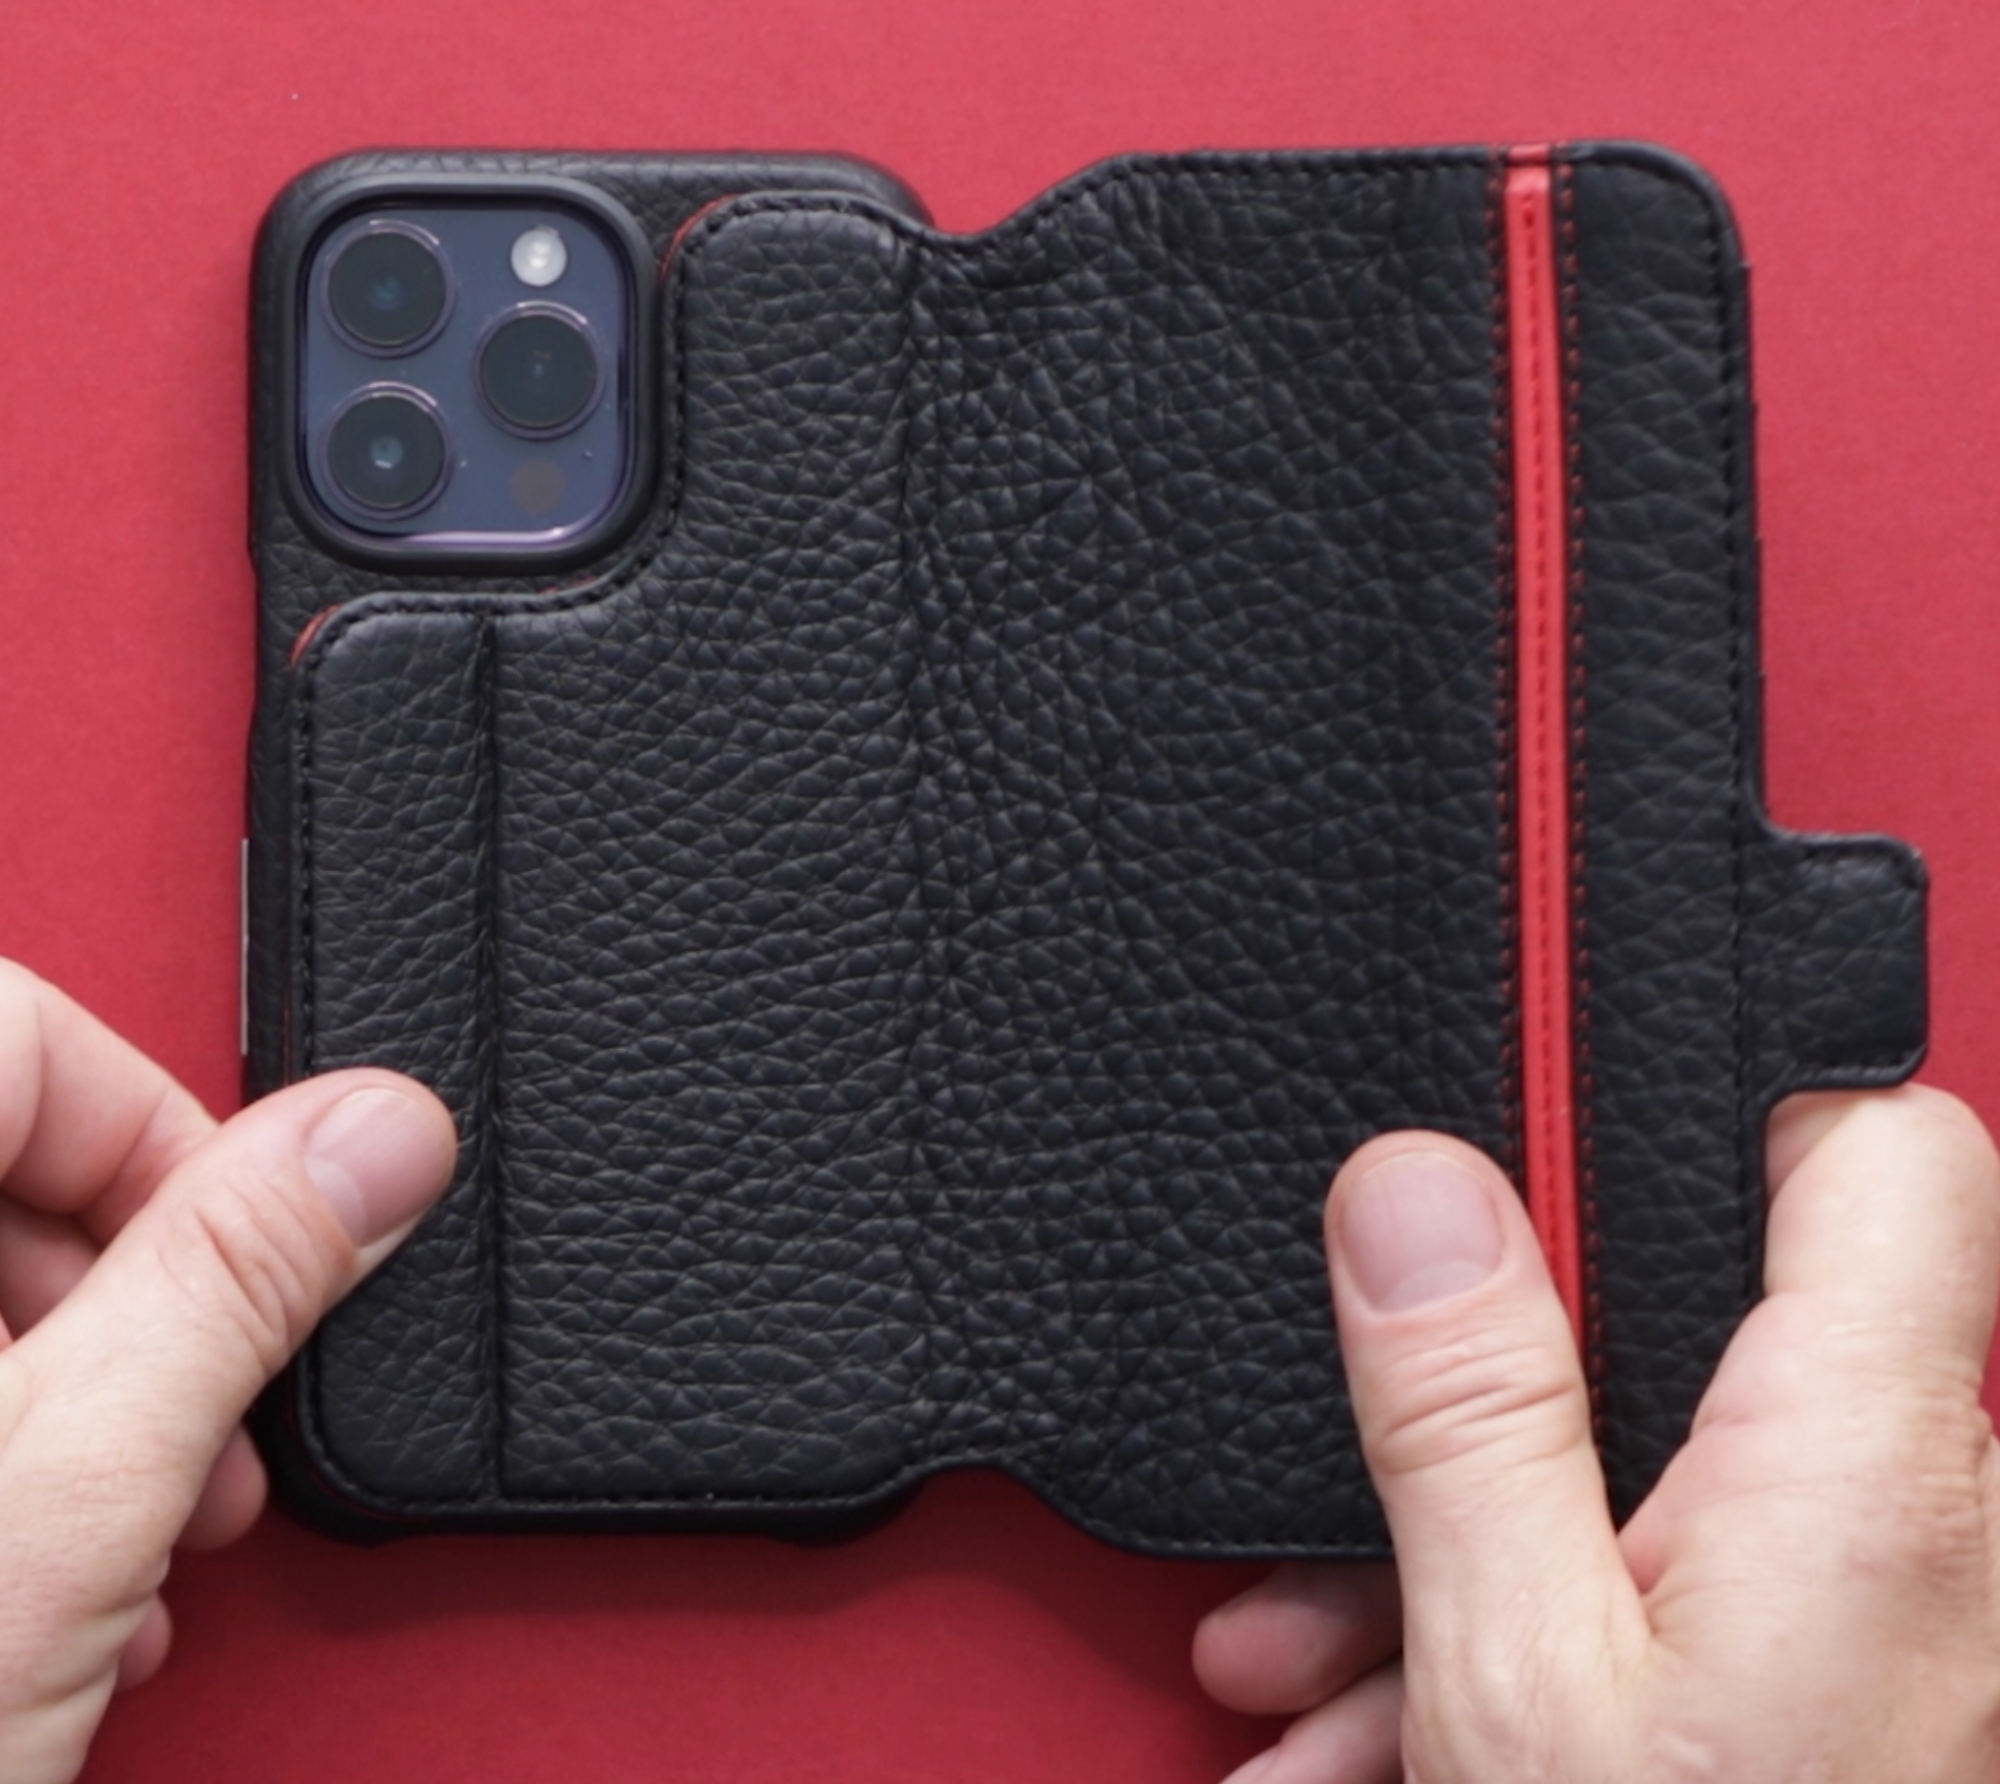 Customize your iPhone 15 Pro Max leather case - Vaja